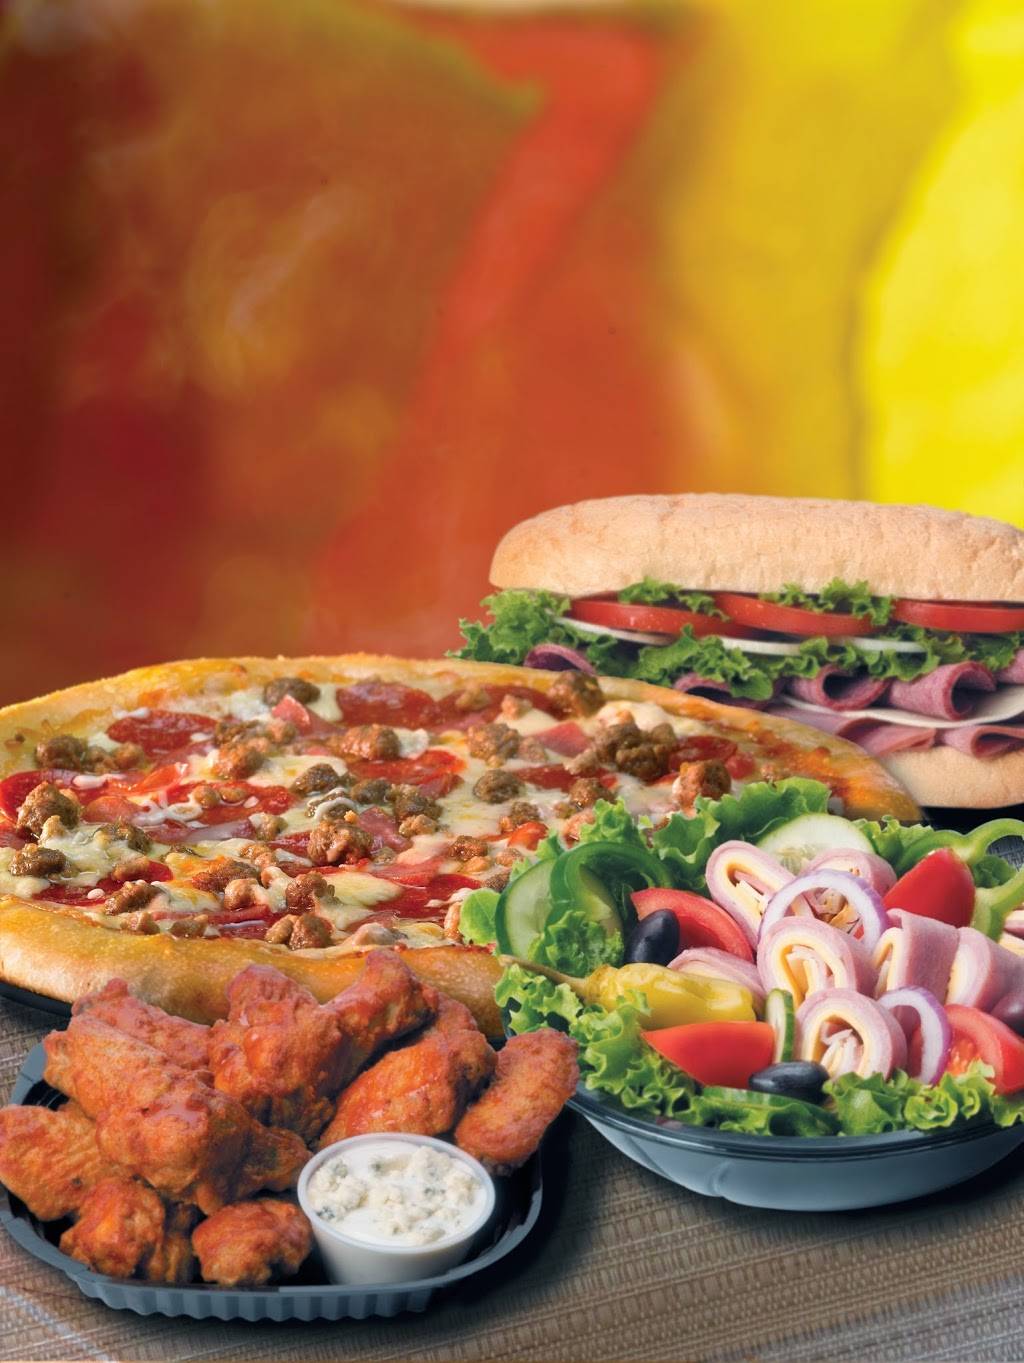 Pizza Bolis | meal delivery | 12949 Wisteria Dr, Germantown, MD 20874, USA | 3015405000 OR +1 301-540-5000